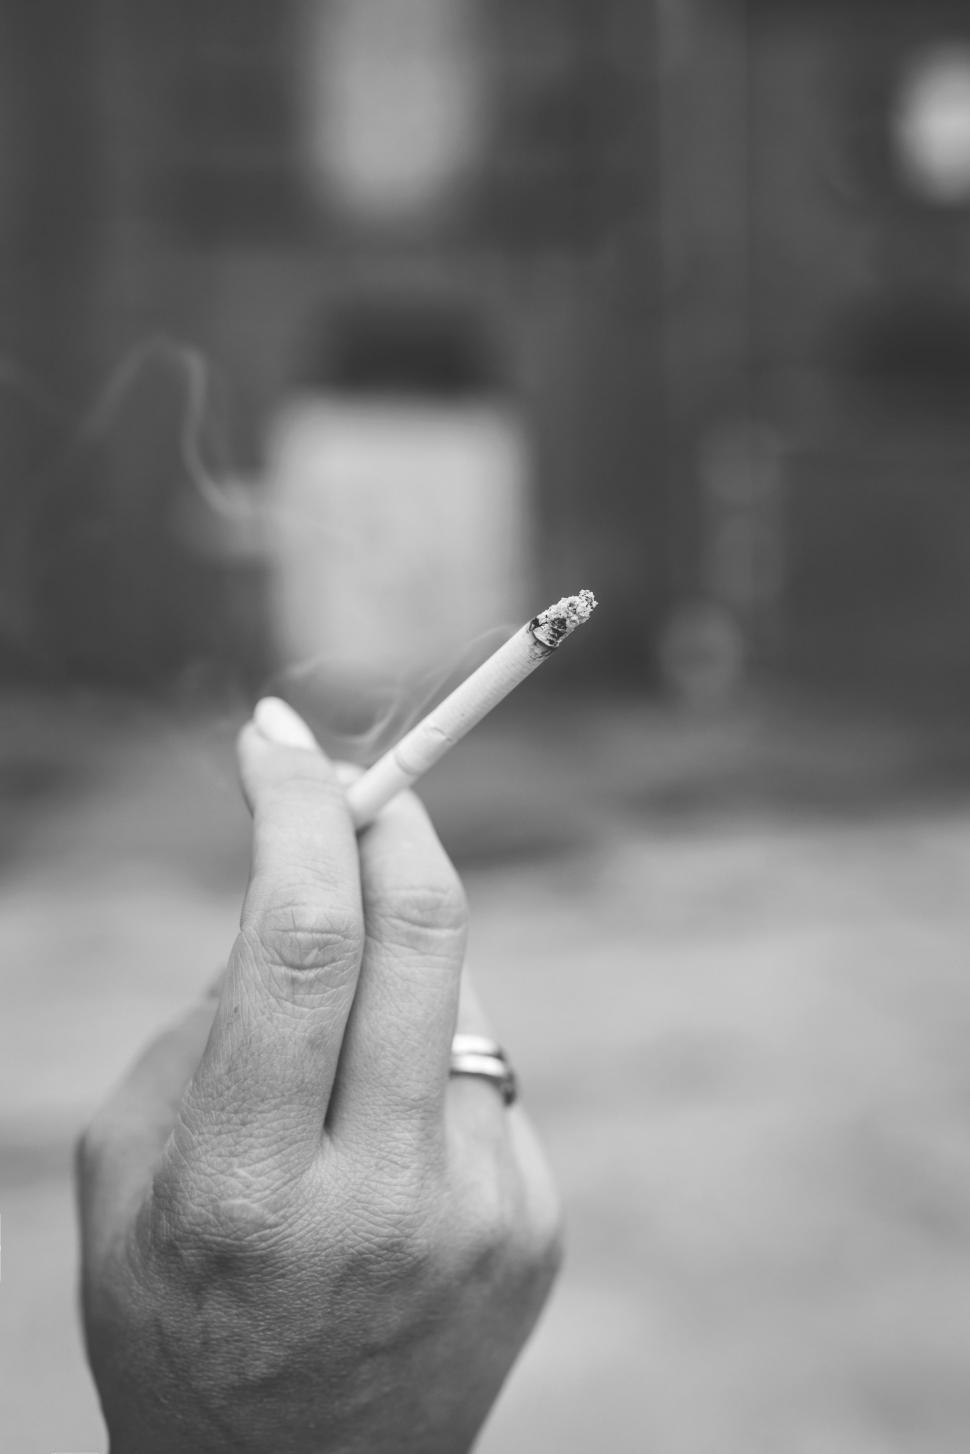 Free Image of Burning Cigarette and hand 